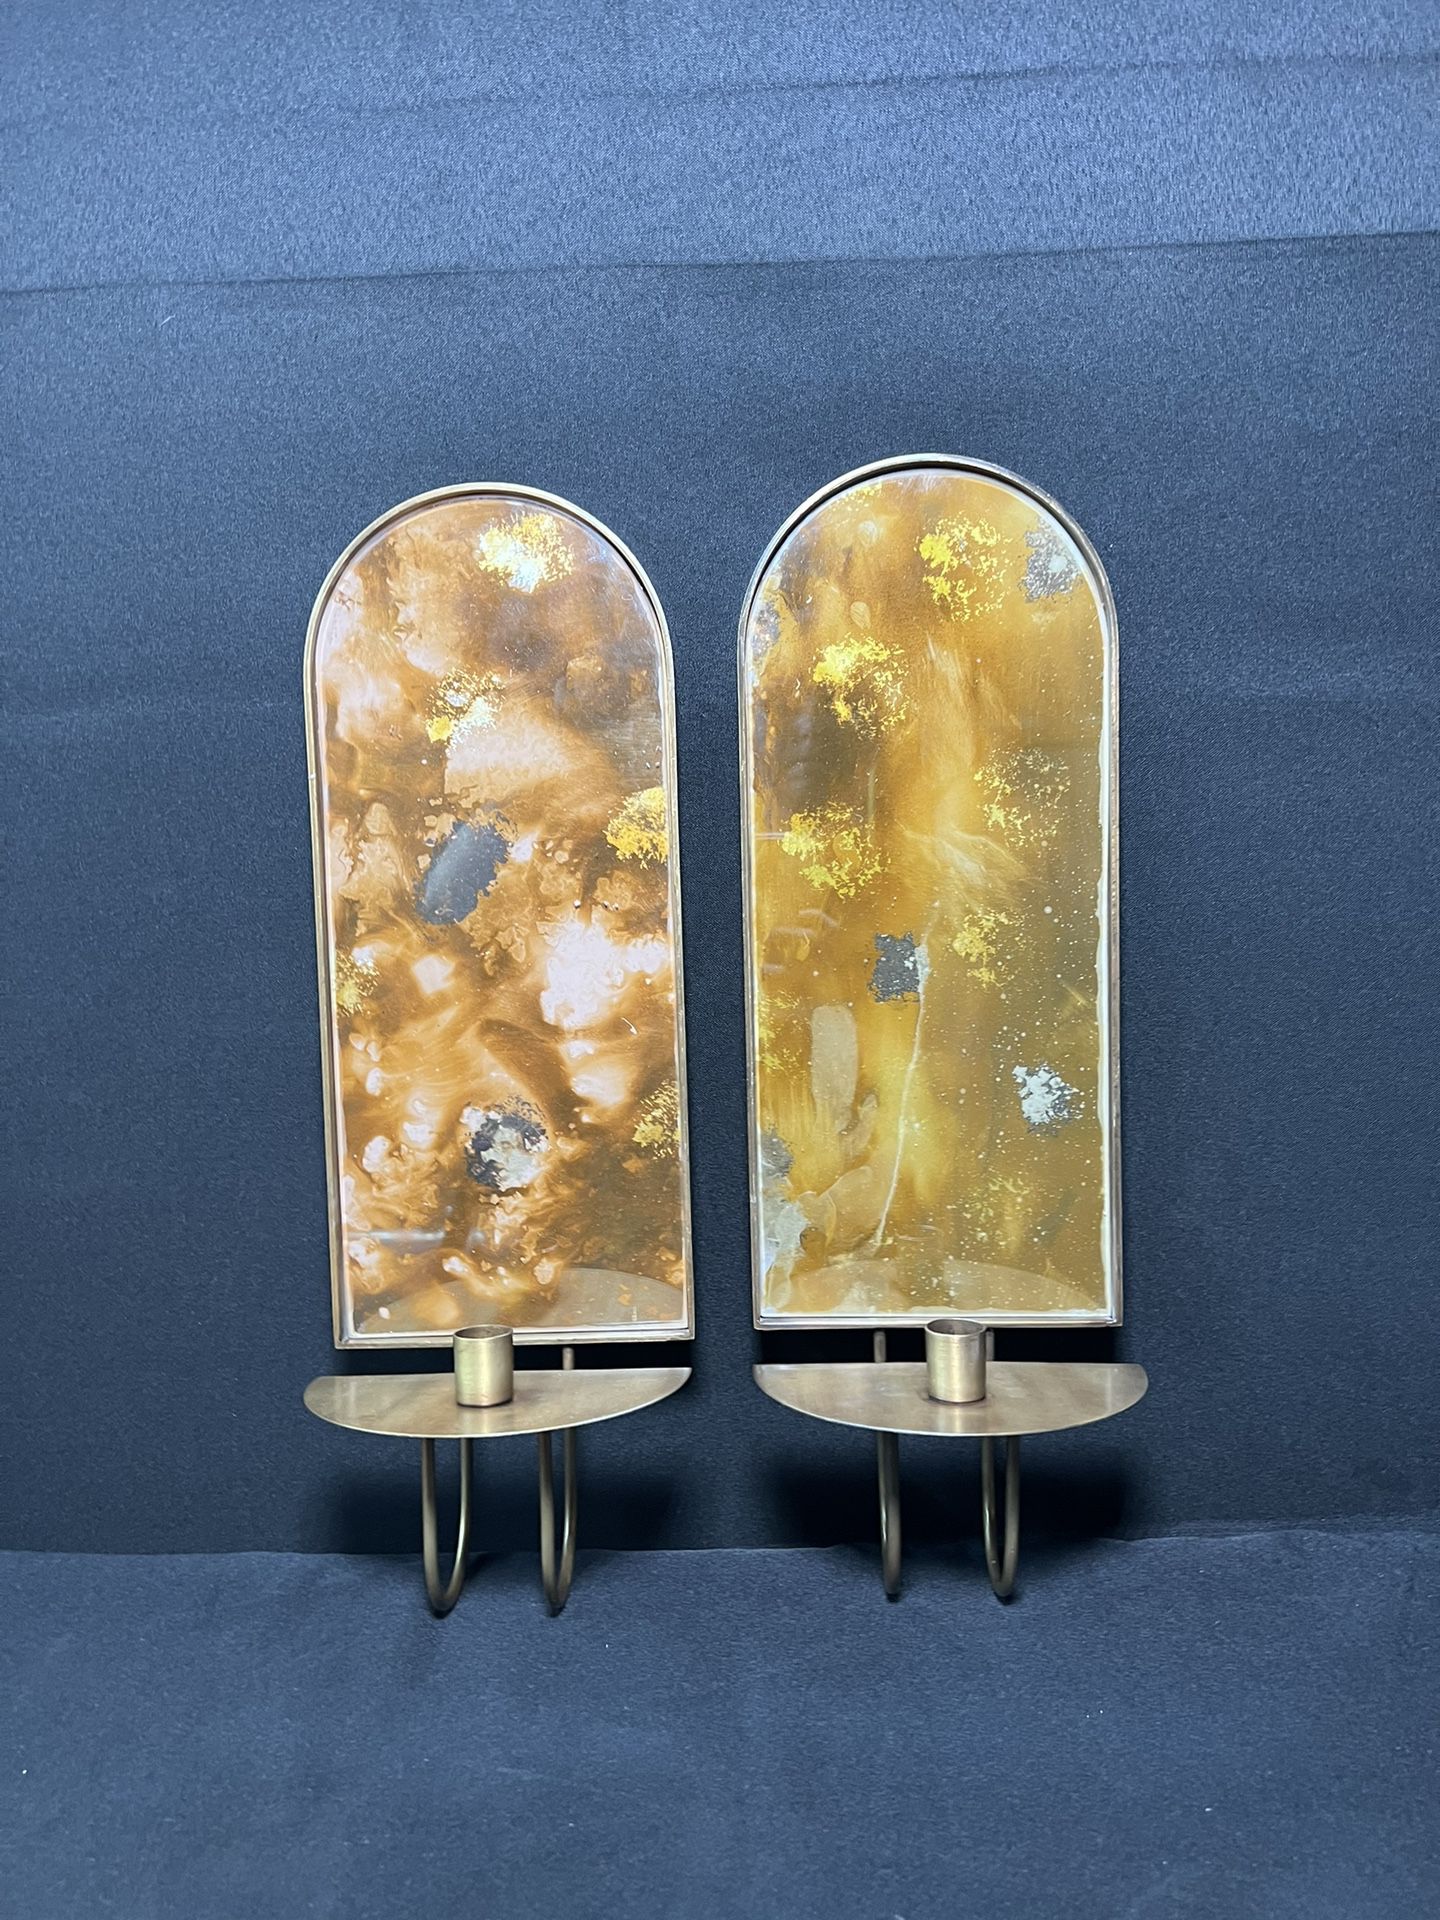 Antique Looking Wall Sconces Candles